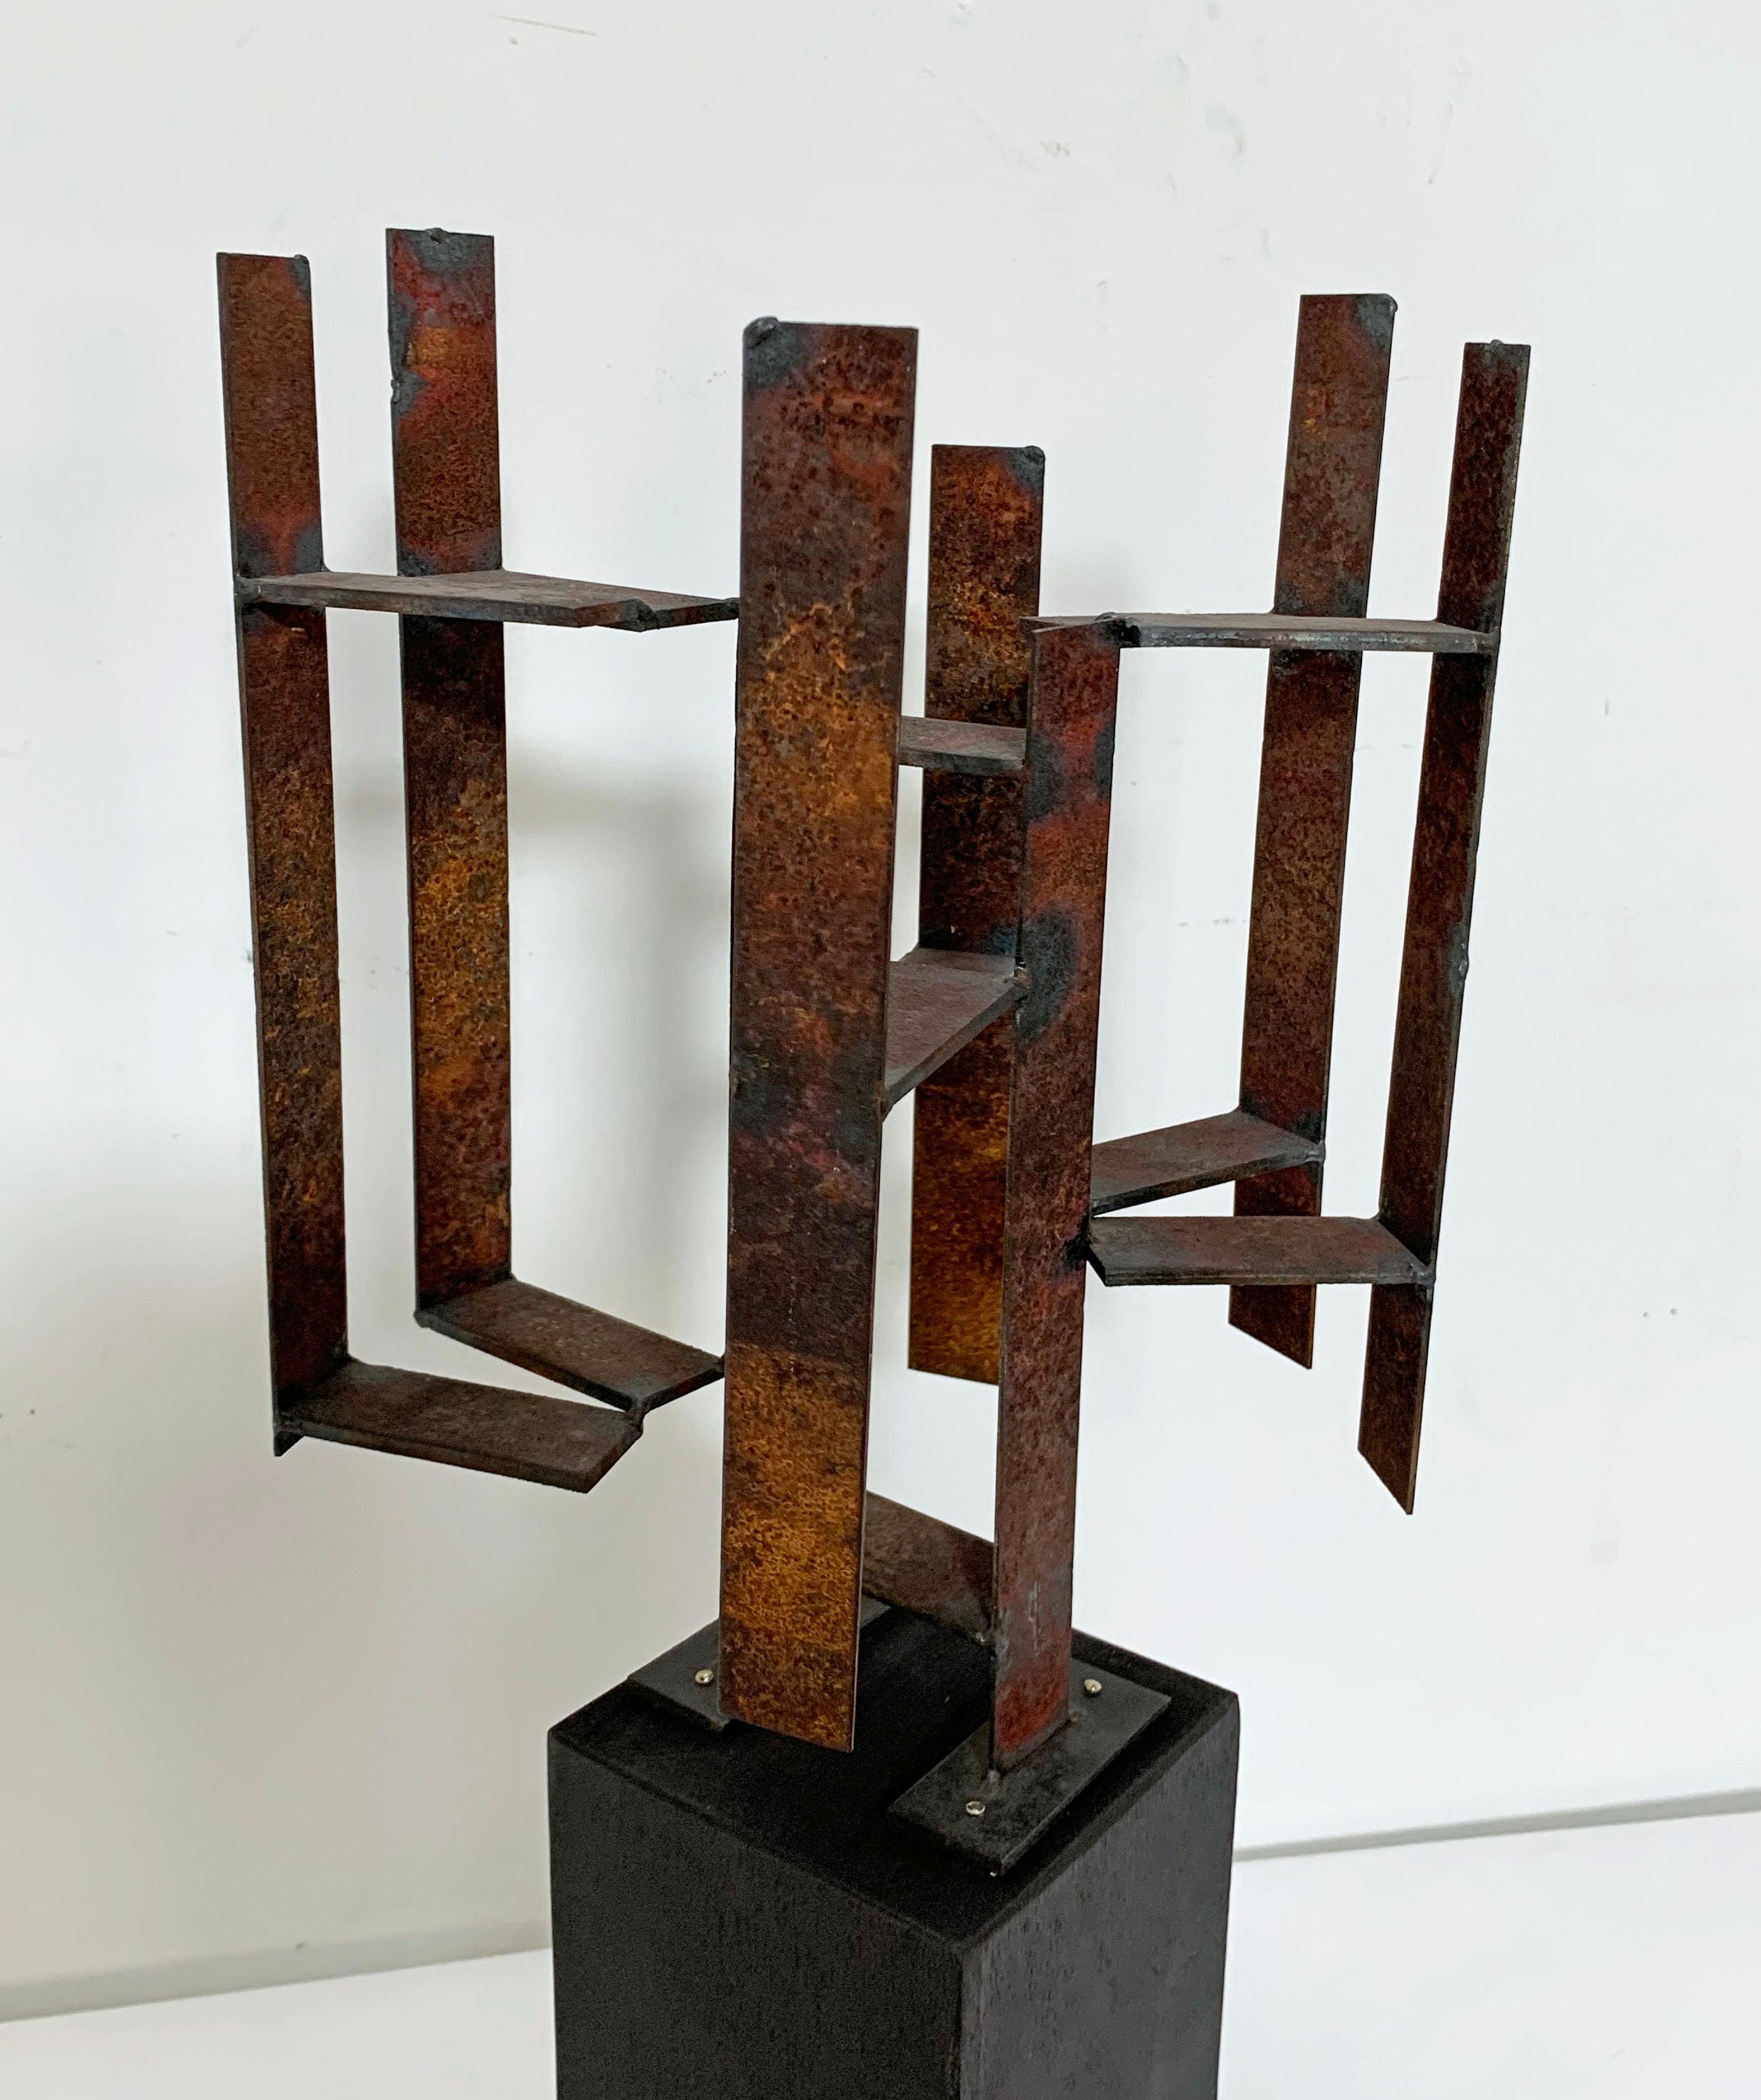 American Mid-Century Modern Abstract Brutalist Welded Steel Sculpture by John Livermore For Sale